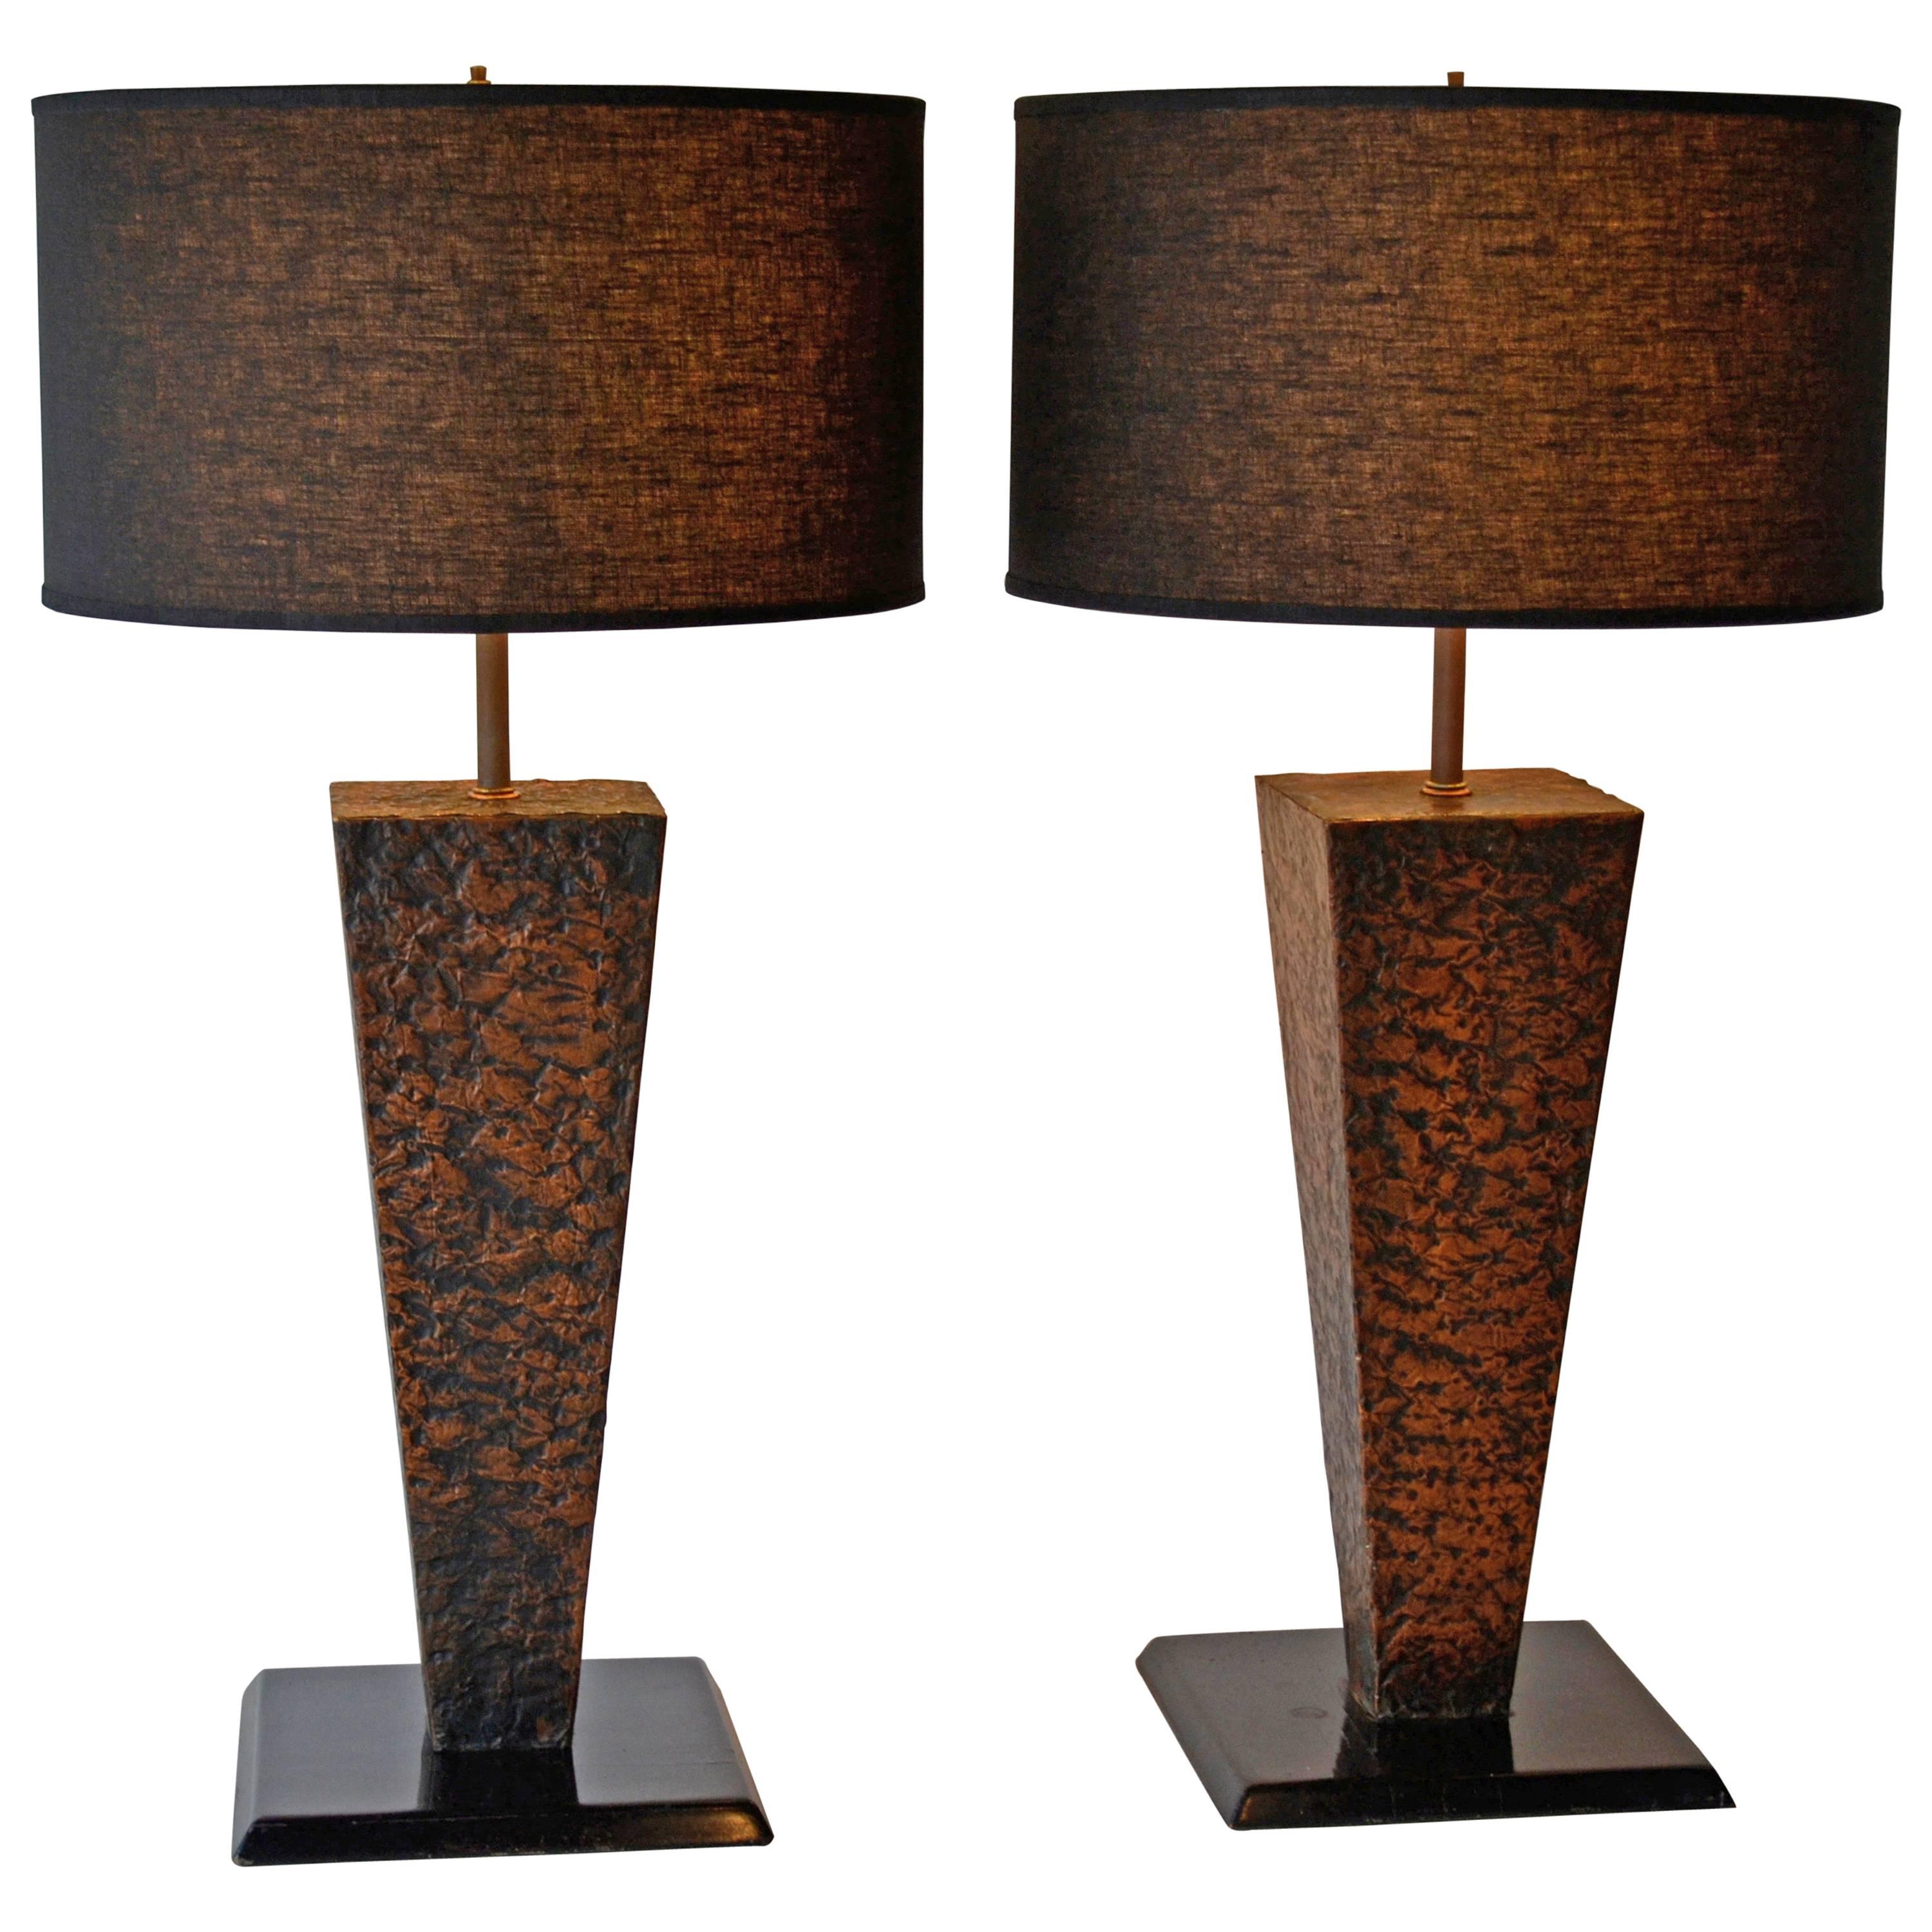 Pair of Hammered Copper Table Lamps Folk Art Handcrafted, 1950's